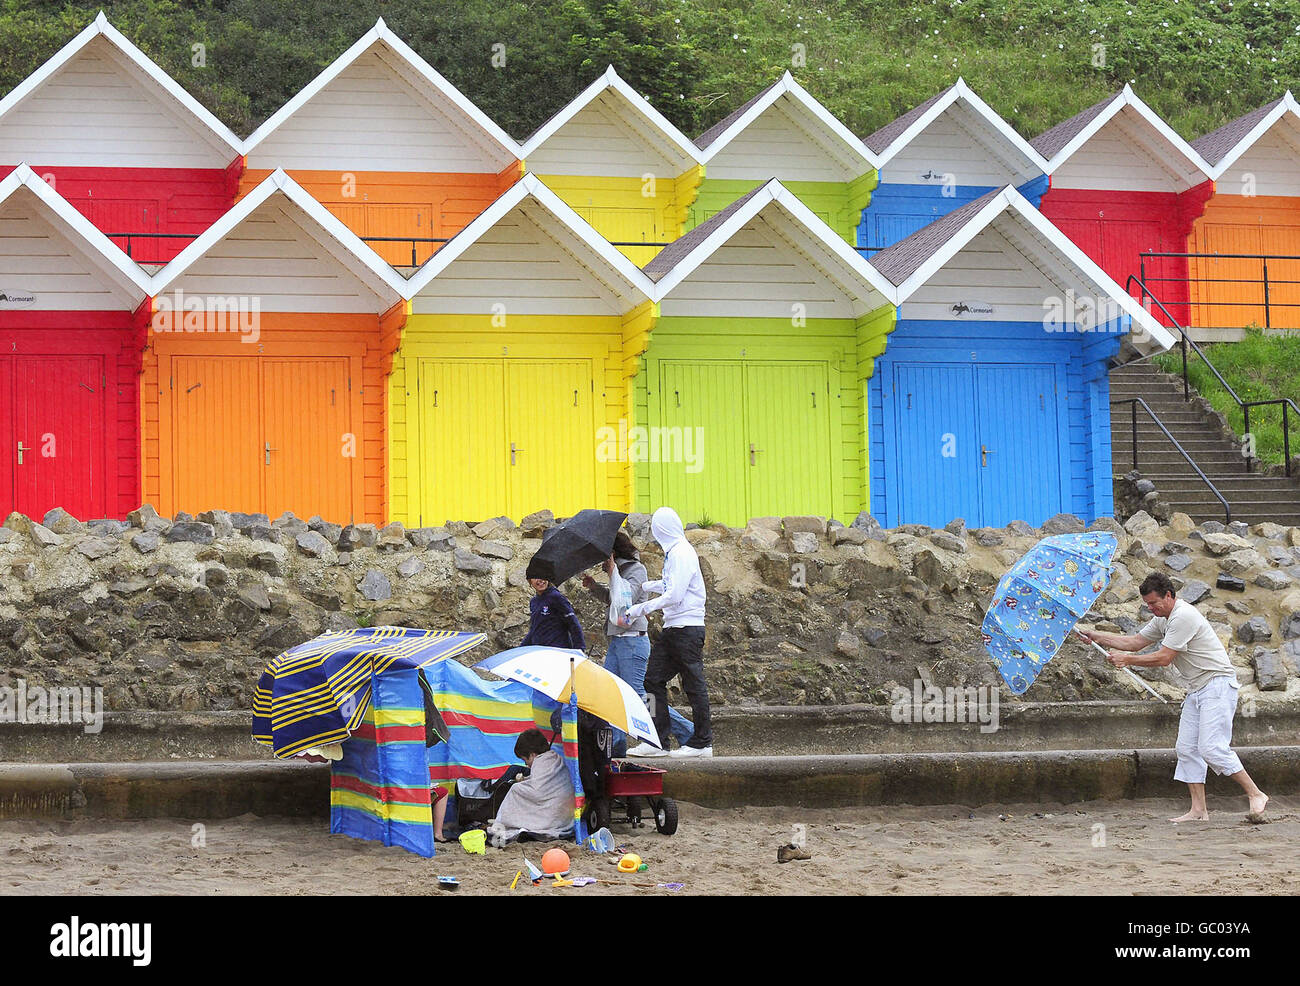 Holiday-makers in heavy rain and strong winds on Scarborough beach. The Met Office had predicted a rainy August, opposed to its earlier statement in April when it issued a seasonal forecast that sparked hopes for a warm and sunny summer with a claim that the UK was 'odds-on for a barbecue summer'. Stock Photo